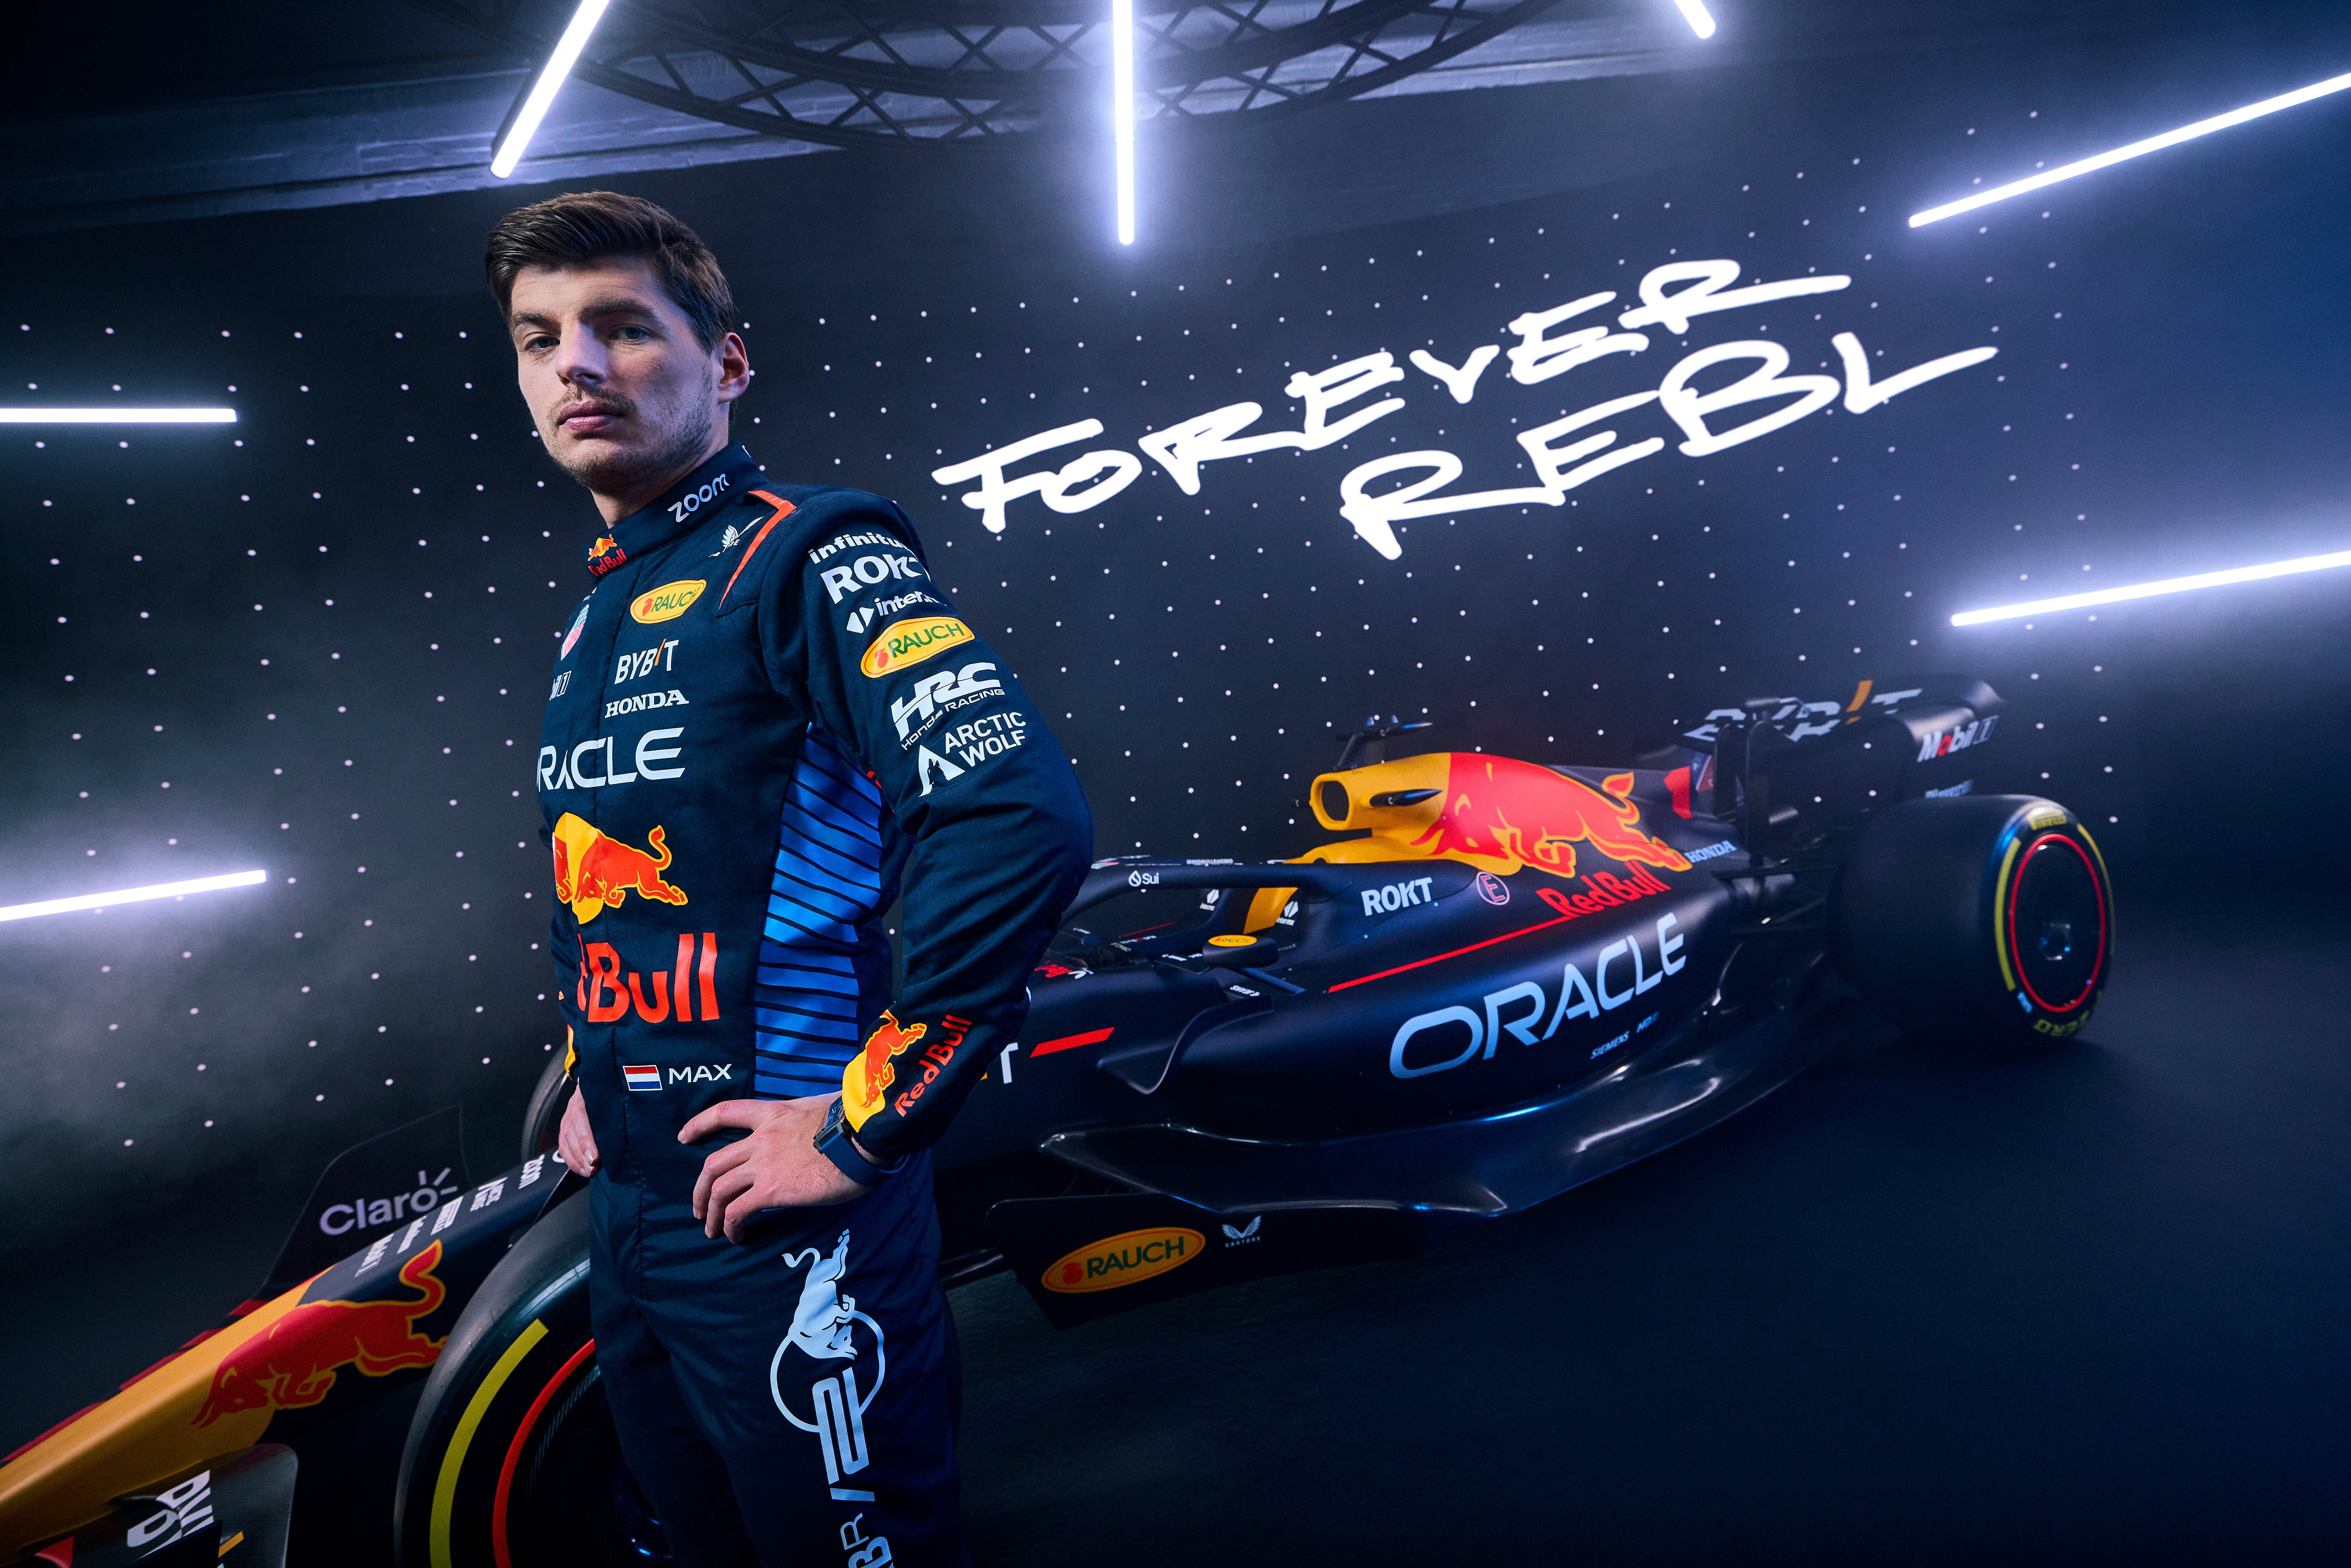 Max Verstappen is the favourite again this year in a new-look Red Bull car